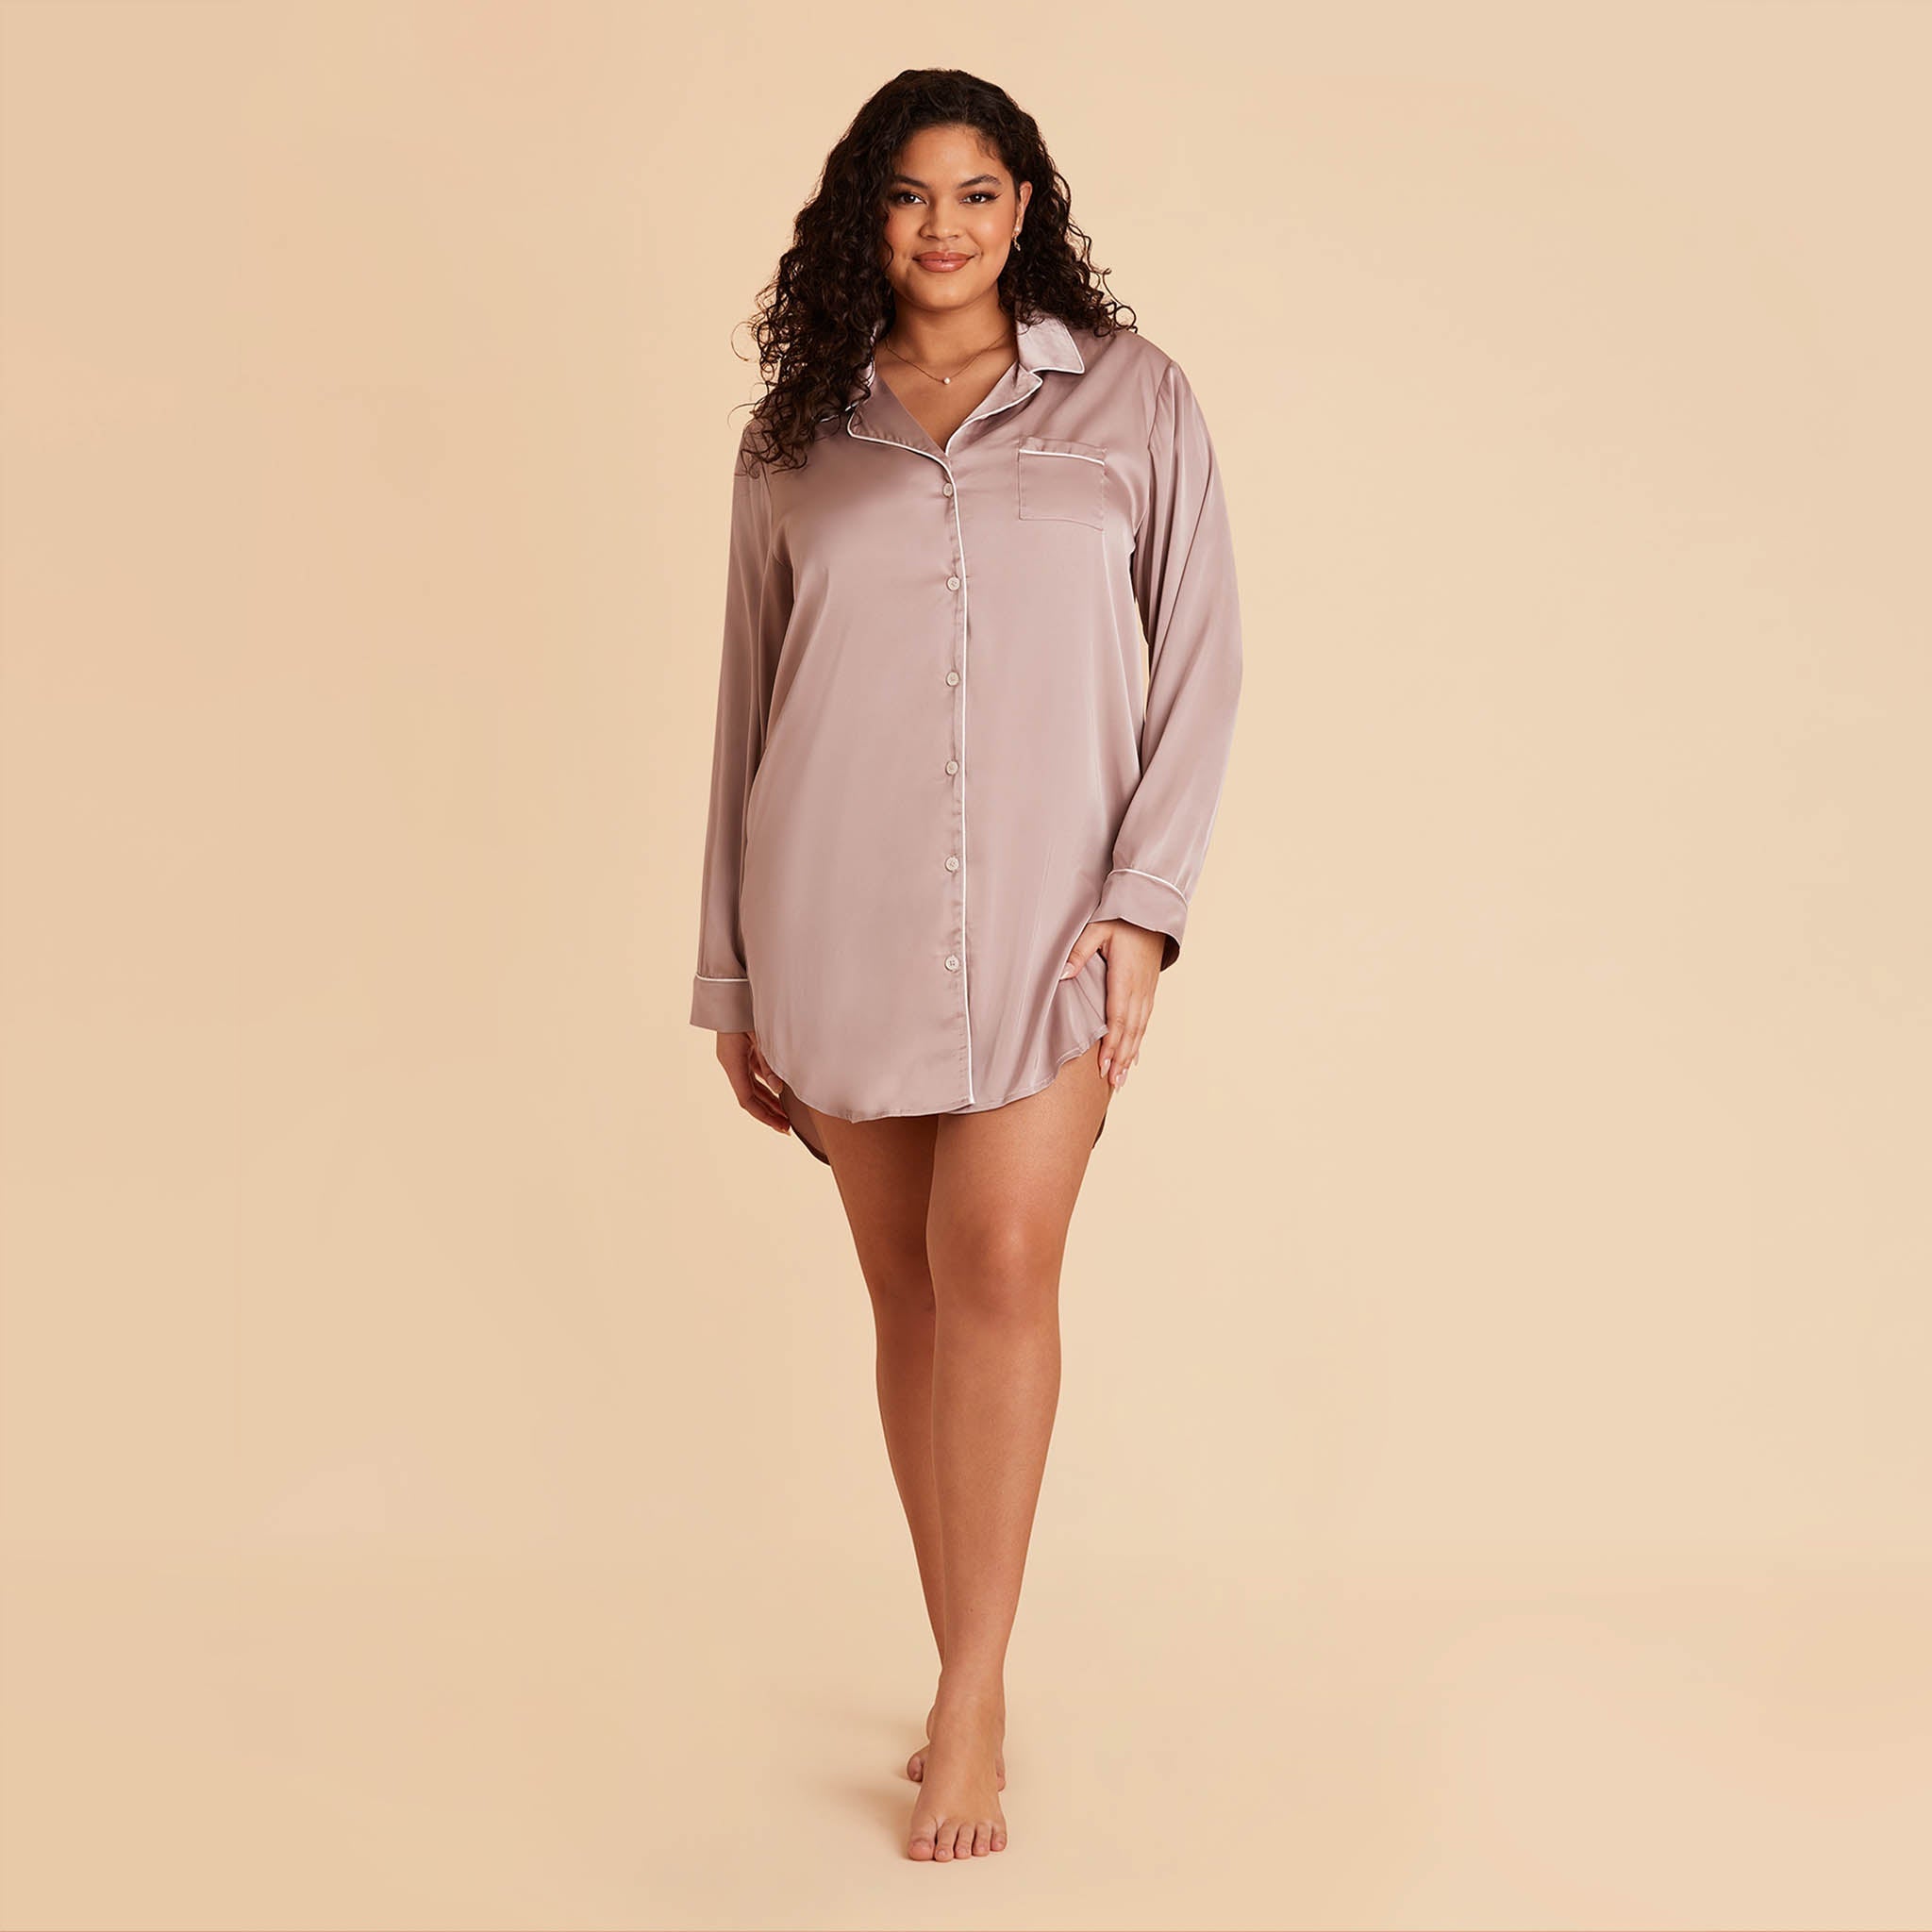 Plus Size Satin Sleepshirt in mauve taupe by Birdy Grey, front view